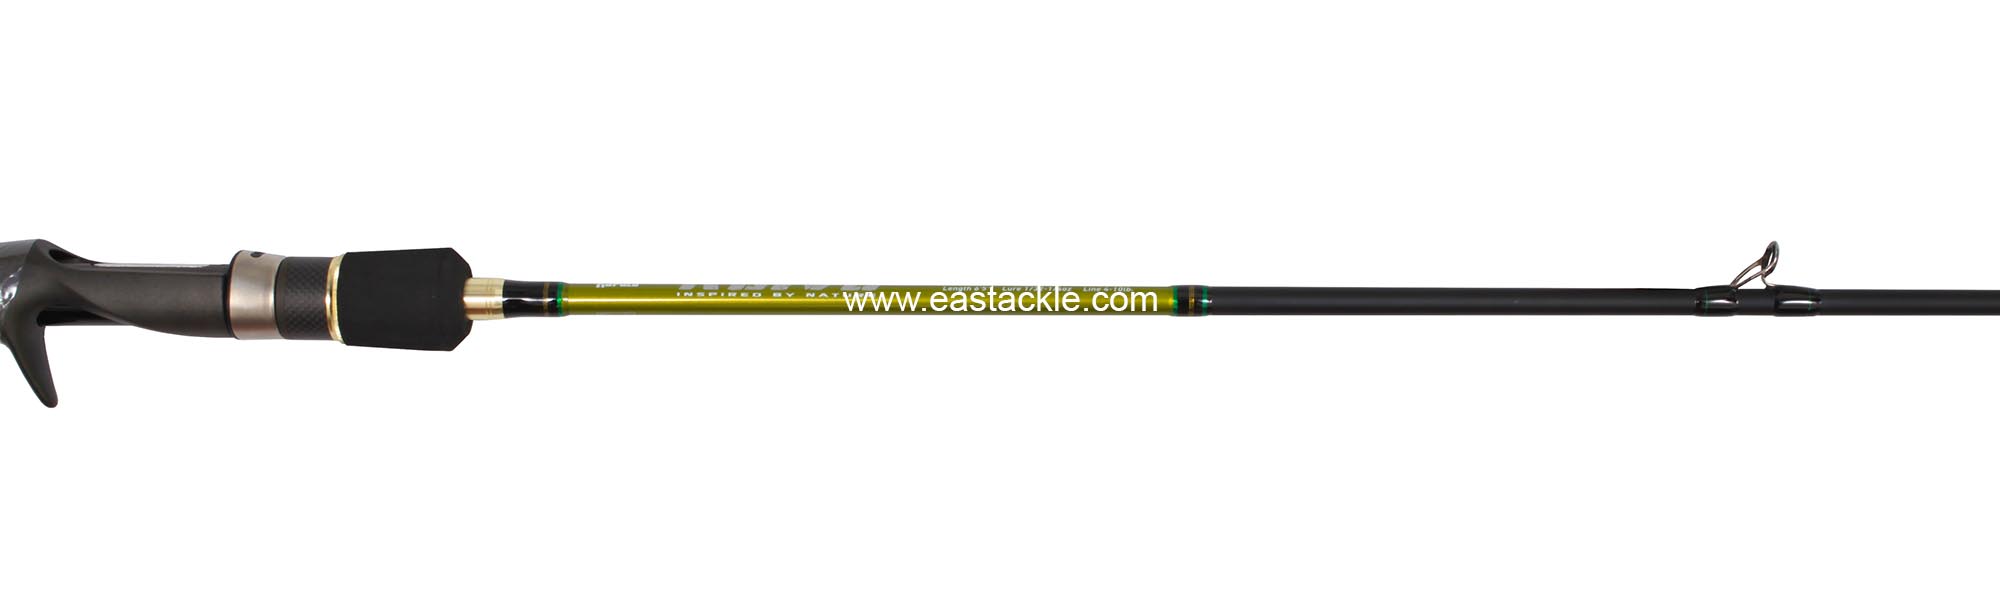 Rapala - Koivu - KVC651L - Bait Casting Rod - Reel Seat Fore Grip to Stipper Guide (Side View) | Eastackle